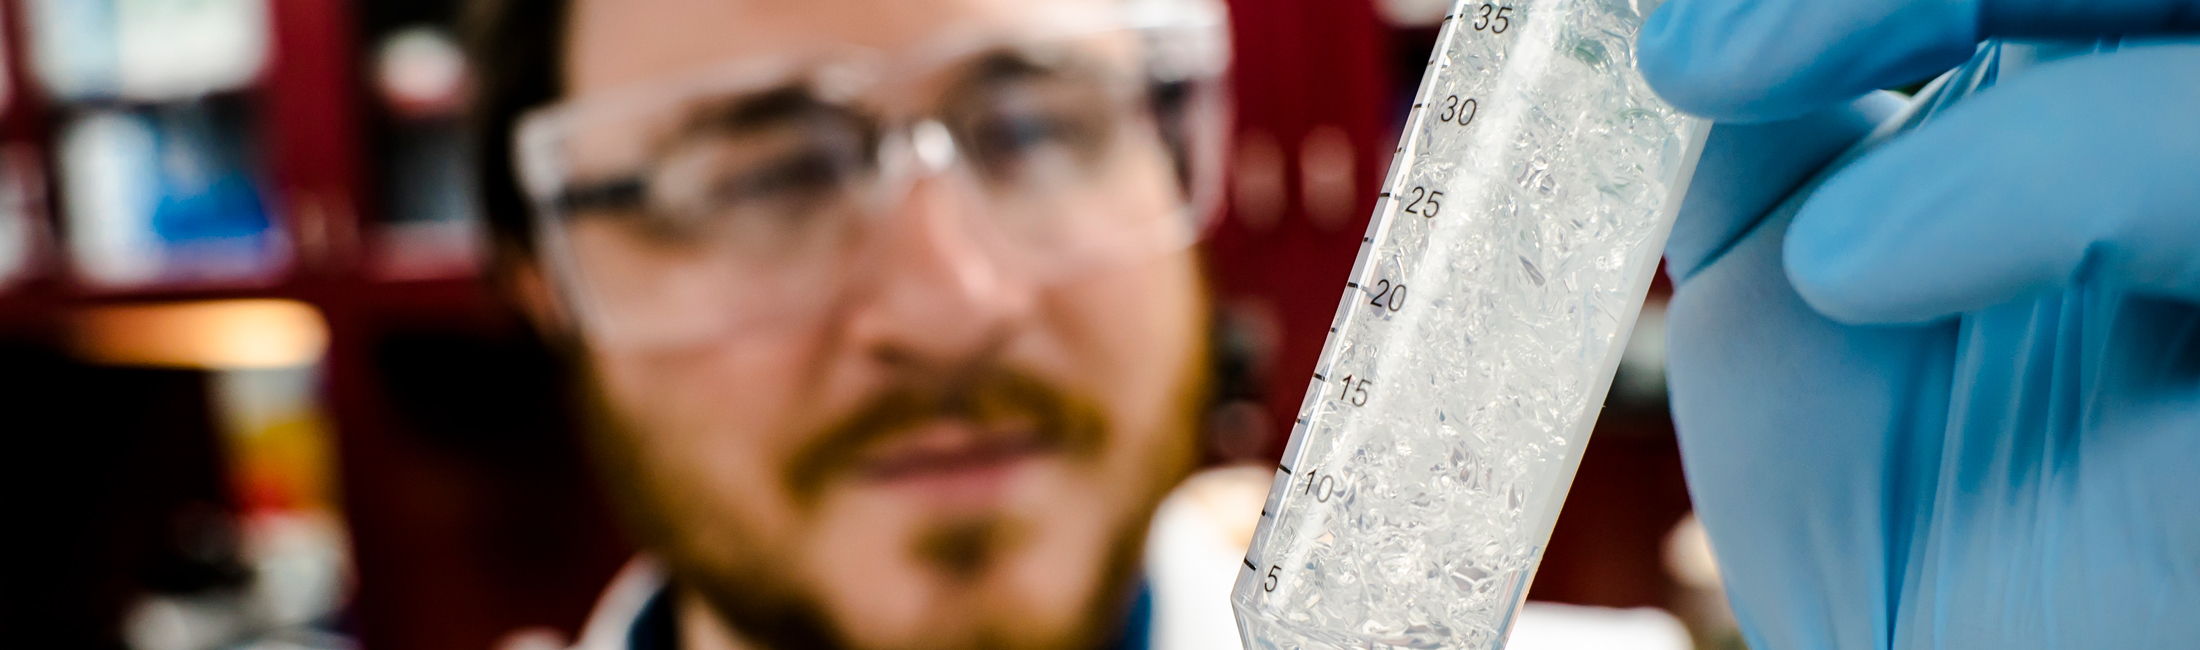 Jeremy Minty, a 2013 Ph.D. graduate of Michigan Engineering and co-founder of Ecovia Renewables, holds up a sample of the company's AzuraGel product in 2018. Minty participated in NSF's I-Corps program. Ecovia is developing a compostable biopolymer cosmetics. One of its uses could be in compostable diapers. Photo: Evan Dougherty/Michigan Engineering Communications & Marketing